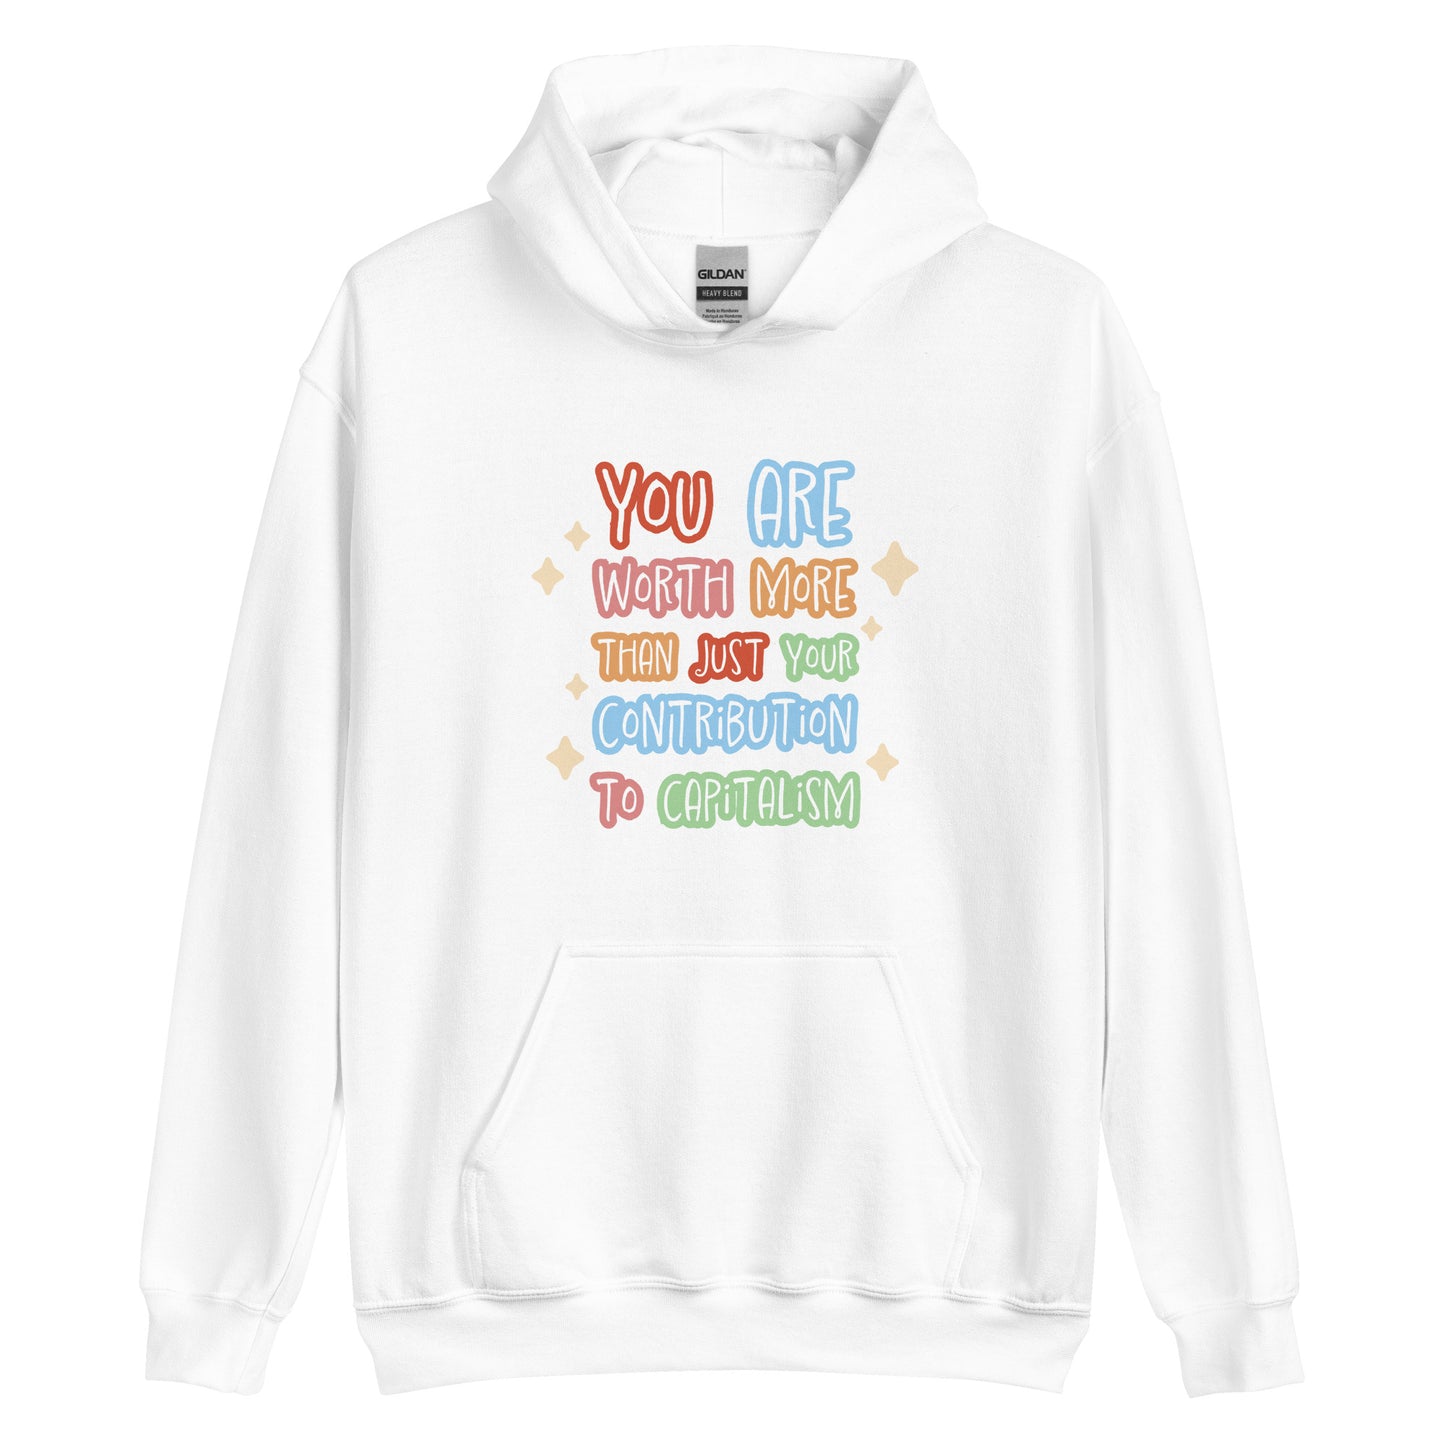 A white hooded sweatshirt featuring colorful hand-written-style text that reads "You are worth more than just your contribution to capitalism". Sparkles surround the text on each side.